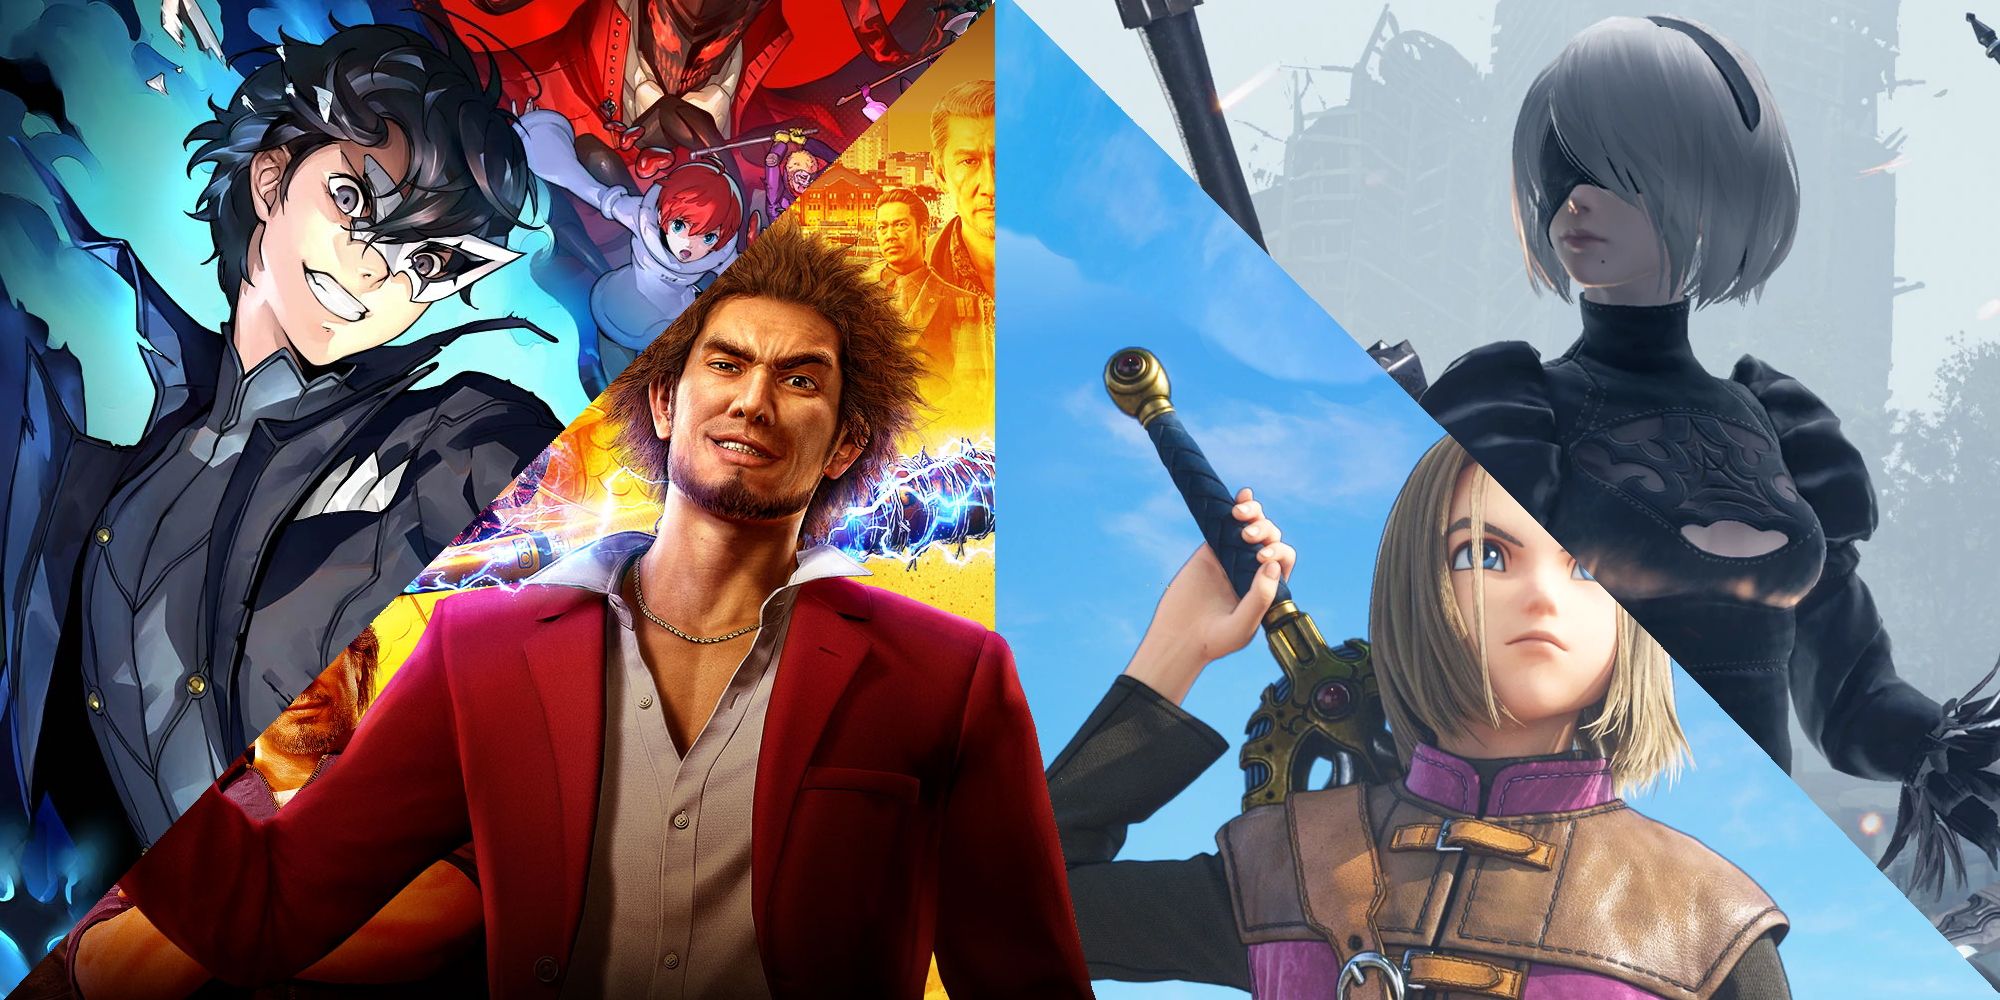 Long Running RPG Franchises That Are In A Better State Now Than Ever (With an image from Yakuza: Like A Dragon, Nier Automata, Dragon Quest 11, and Persona Strikers